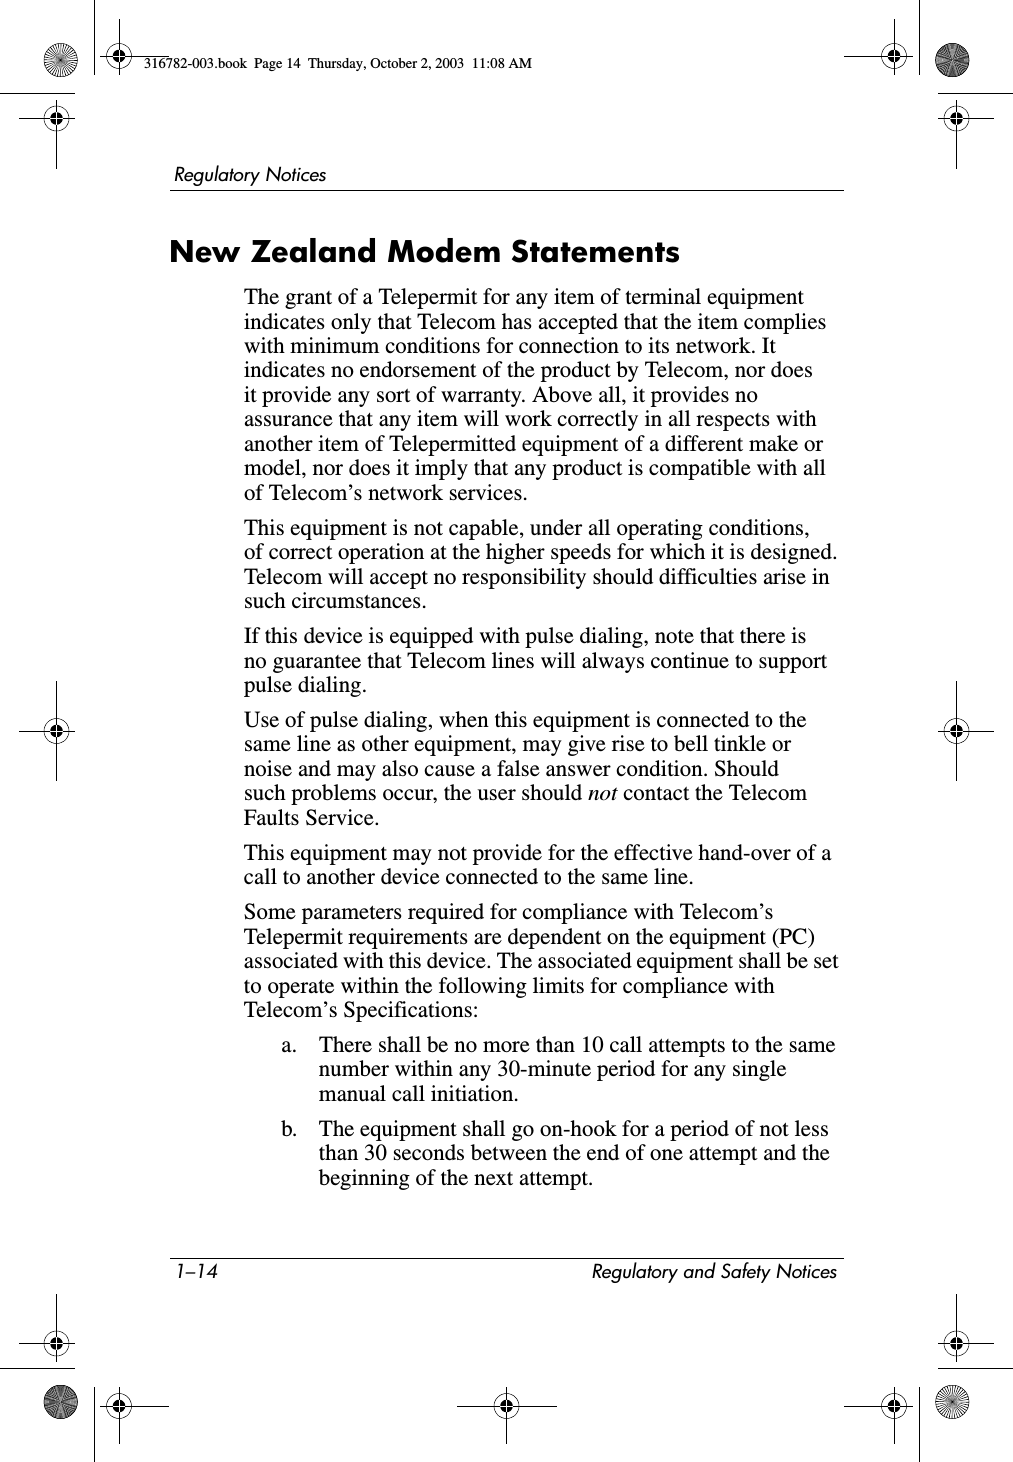 1–14 Regulatory and Safety NoticesRegulatory NoticesNew Zealand Modem StatementsThe grant of a Telepermit for any item of terminal equipment indicates only that Telecom has accepted that the item complies with minimum conditions for connection to its network. It indicates no endorsement of the product by Telecom, nor does it provide any sort of warranty. Above all, it provides no assurance that any item will work correctly in all respects with another item of Telepermitted equipment of a different make or model, nor does it imply that any product is compatible with all of Telecom’s network services.This equipment is not capable, under all operating conditions, of correct operation at the higher speeds for which it is designed. Telecom will accept no responsibility should difficulties arise in such circumstances.If this device is equipped with pulse dialing, note that there is no guarantee that Telecom lines will always continue to support pulse dialing.Use of pulse dialing, when this equipment is connected to the same line as other equipment, may give rise to bell tinkle or noise and may also cause a false answer condition. Should such problems occur, the user should not contact the Telecom Faults Service.This equipment may not provide for the effective hand-over of a call to another device connected to the same line.Some parameters required for compliance with Telecom’s Telepermit requirements are dependent on the equipment (PC) associated with this device. The associated equipment shall be set to operate within the following limits for compliance with Telecom’s Specifications:a. There shall be no more than 10 call attempts to the same number within any 30-minute period for any single manual call initiation.b. The equipment shall go on-hook for a period of not less than 30 seconds between the end of one attempt and the beginning of the next attempt.316782-003.book  Page 14  Thursday, October 2, 2003  11:08 AM